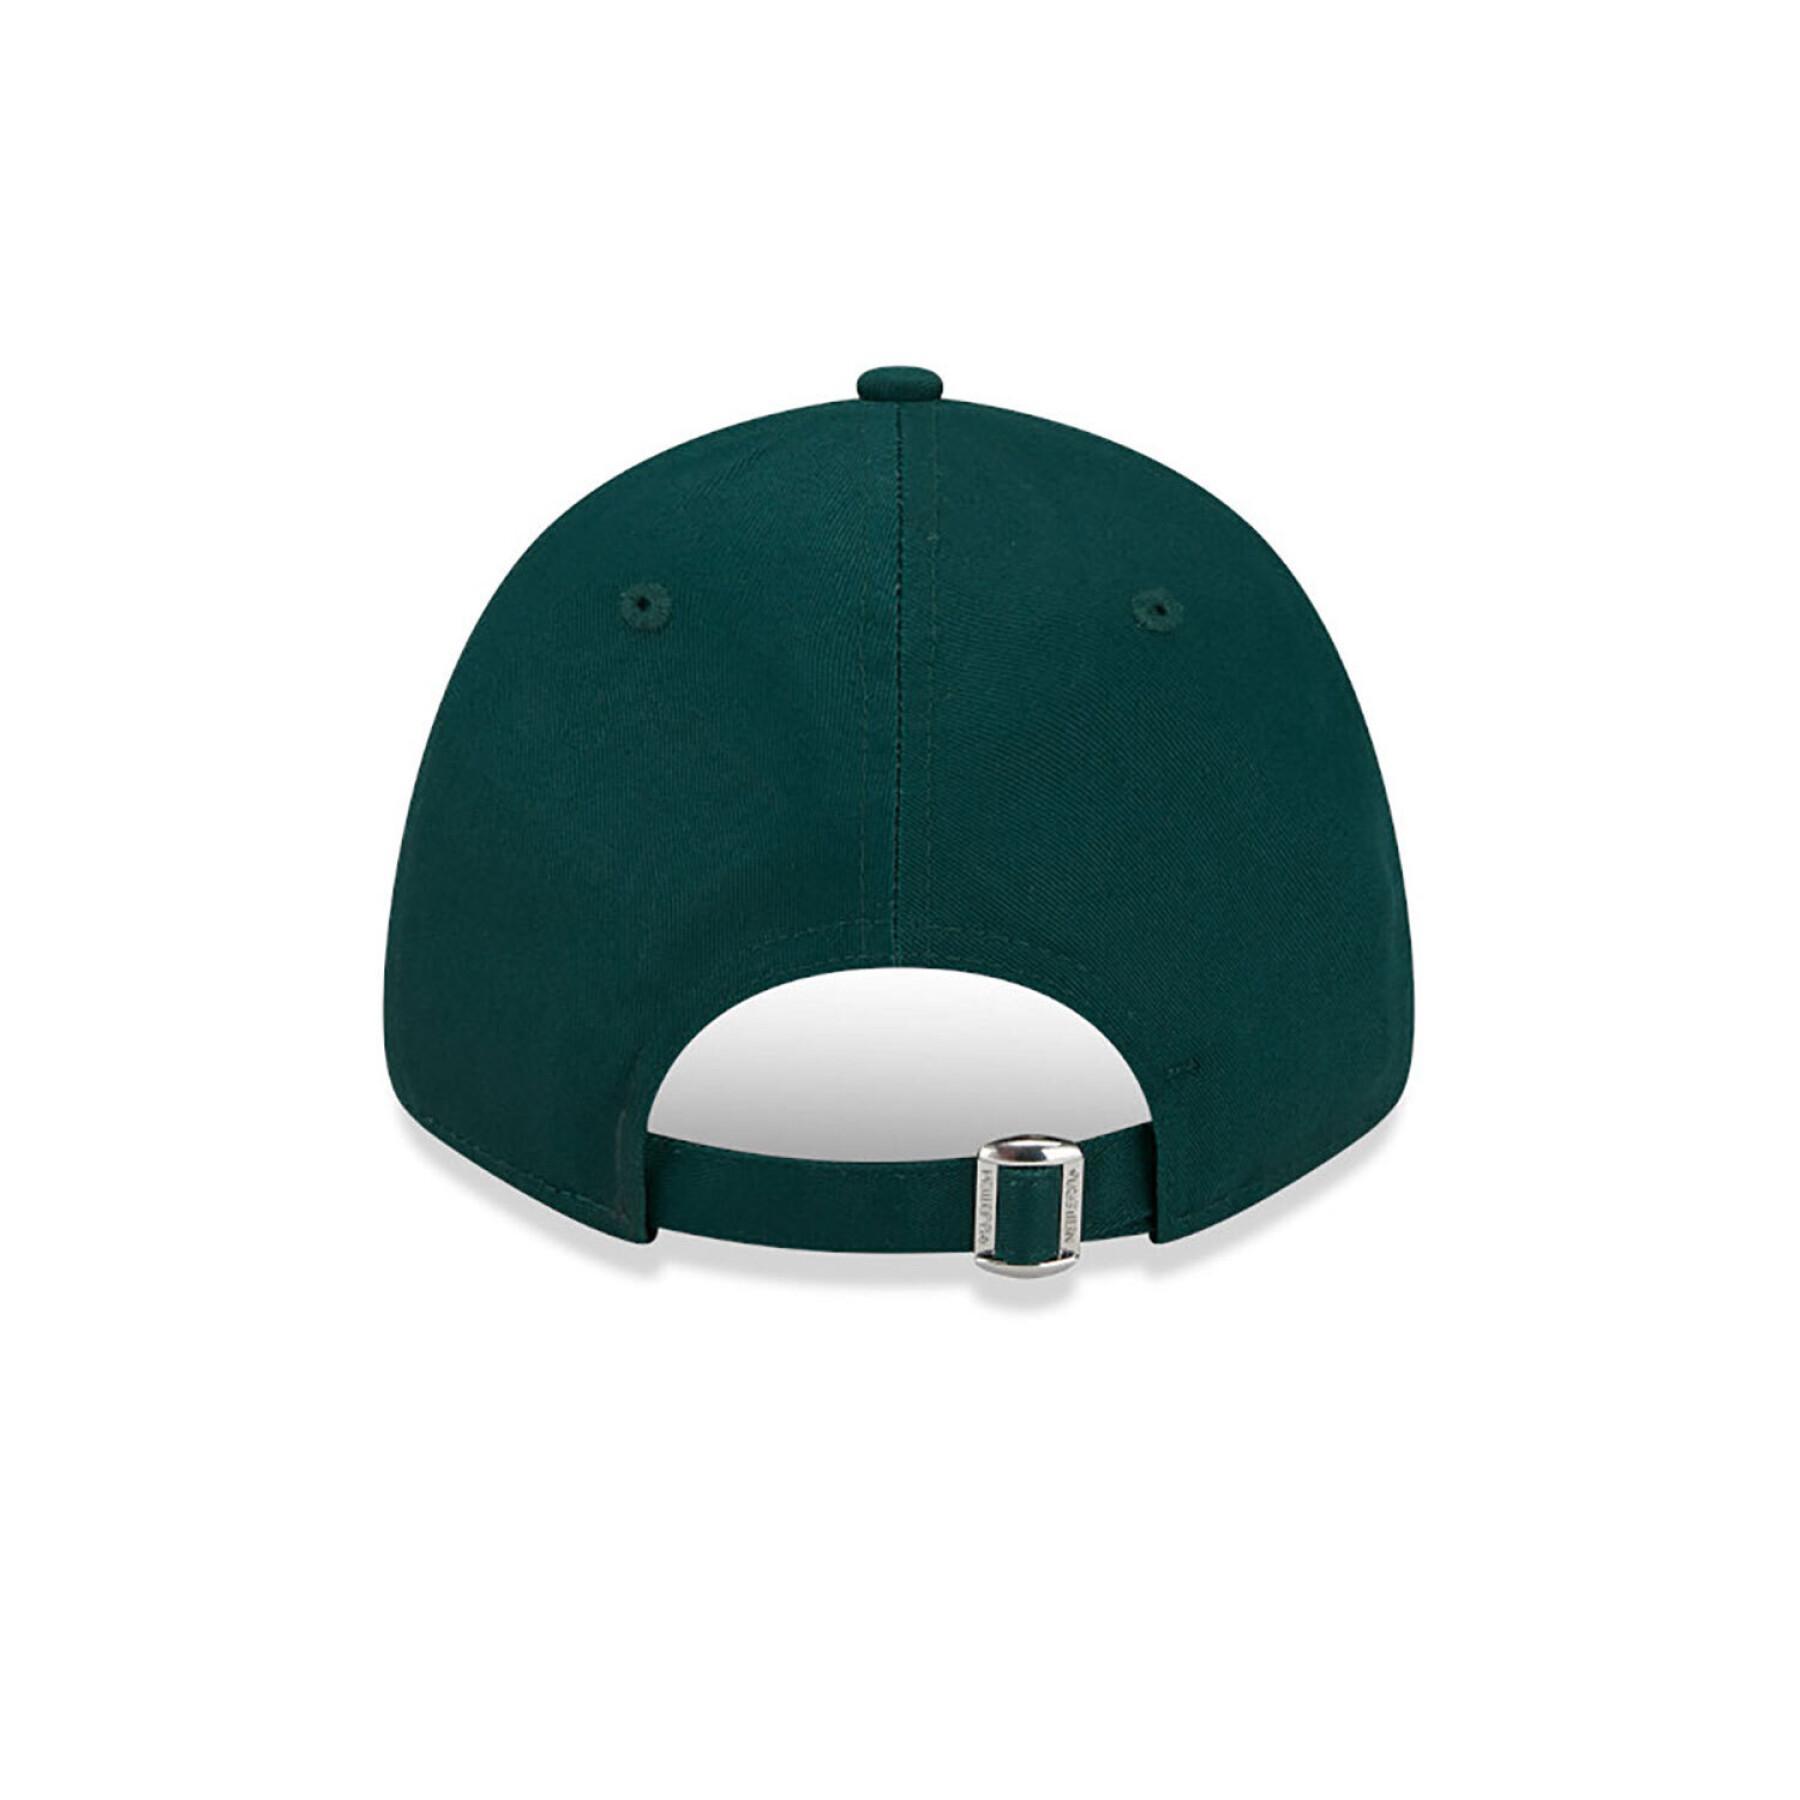 Casquette de baseball Oakland Athletics 9Forty New Traditions